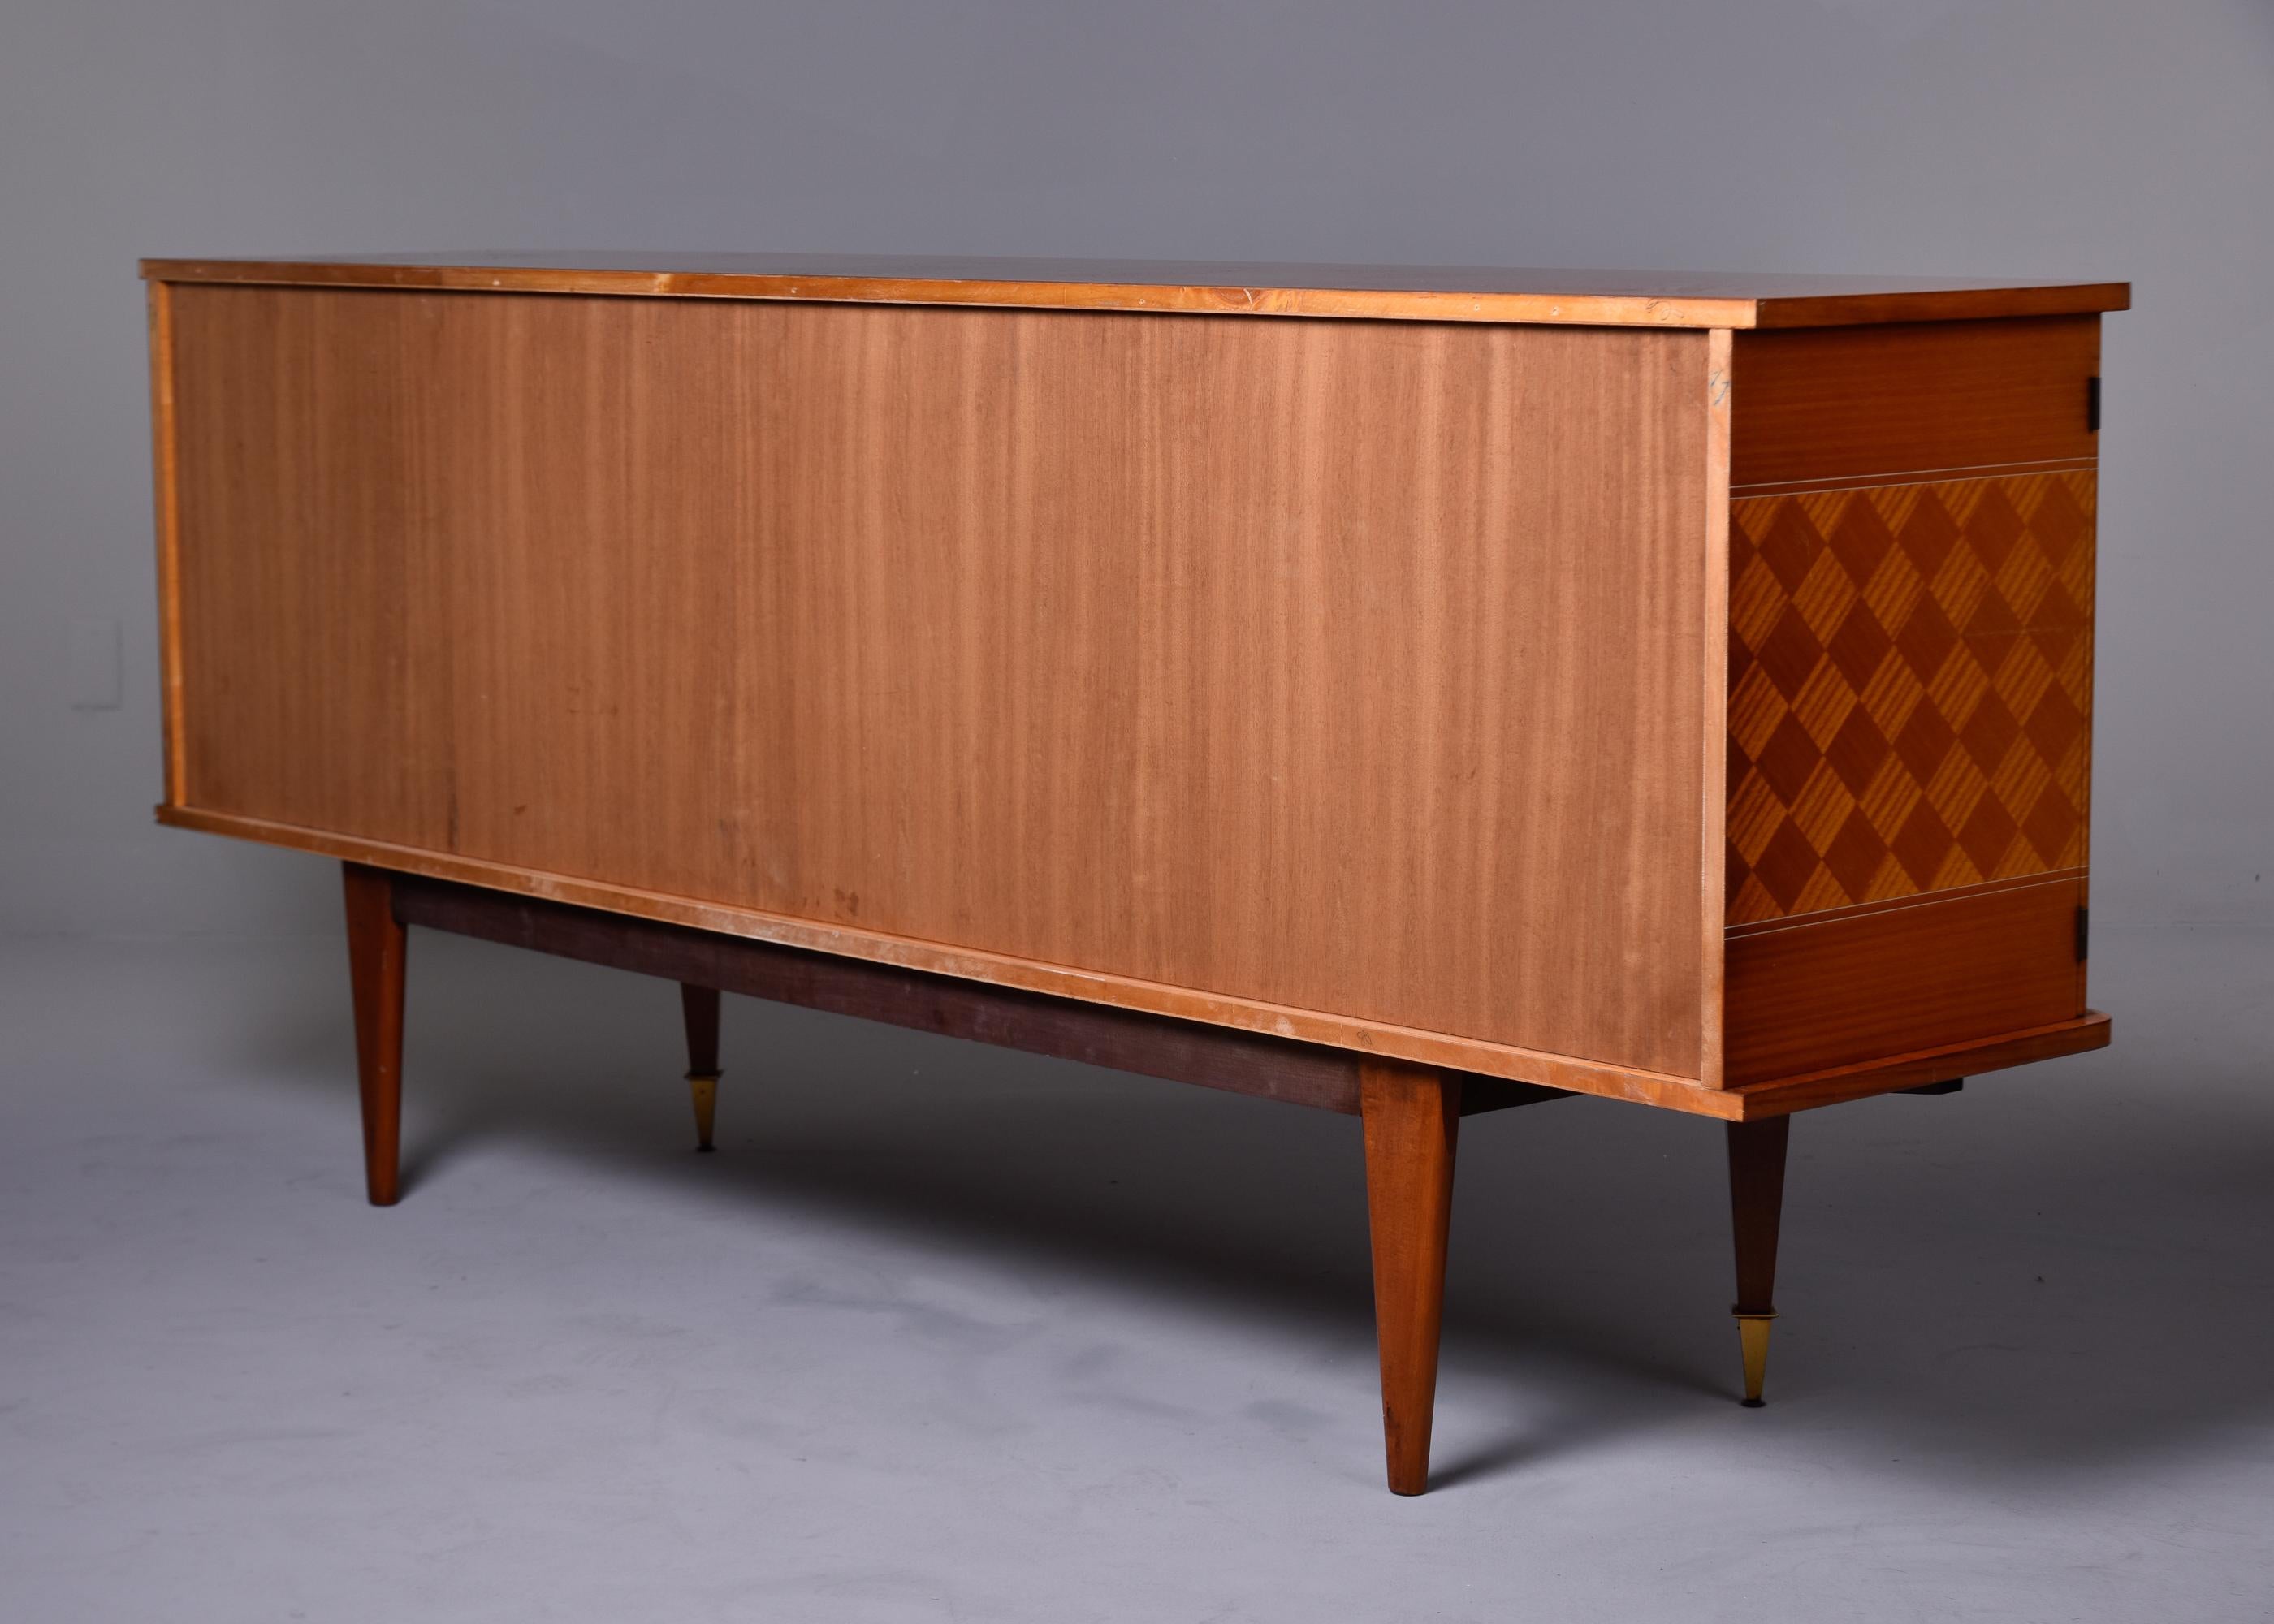 French Art Deco Mahogany Buffet Sideboard Credenza with Checkerboard Parquetry For Sale 7